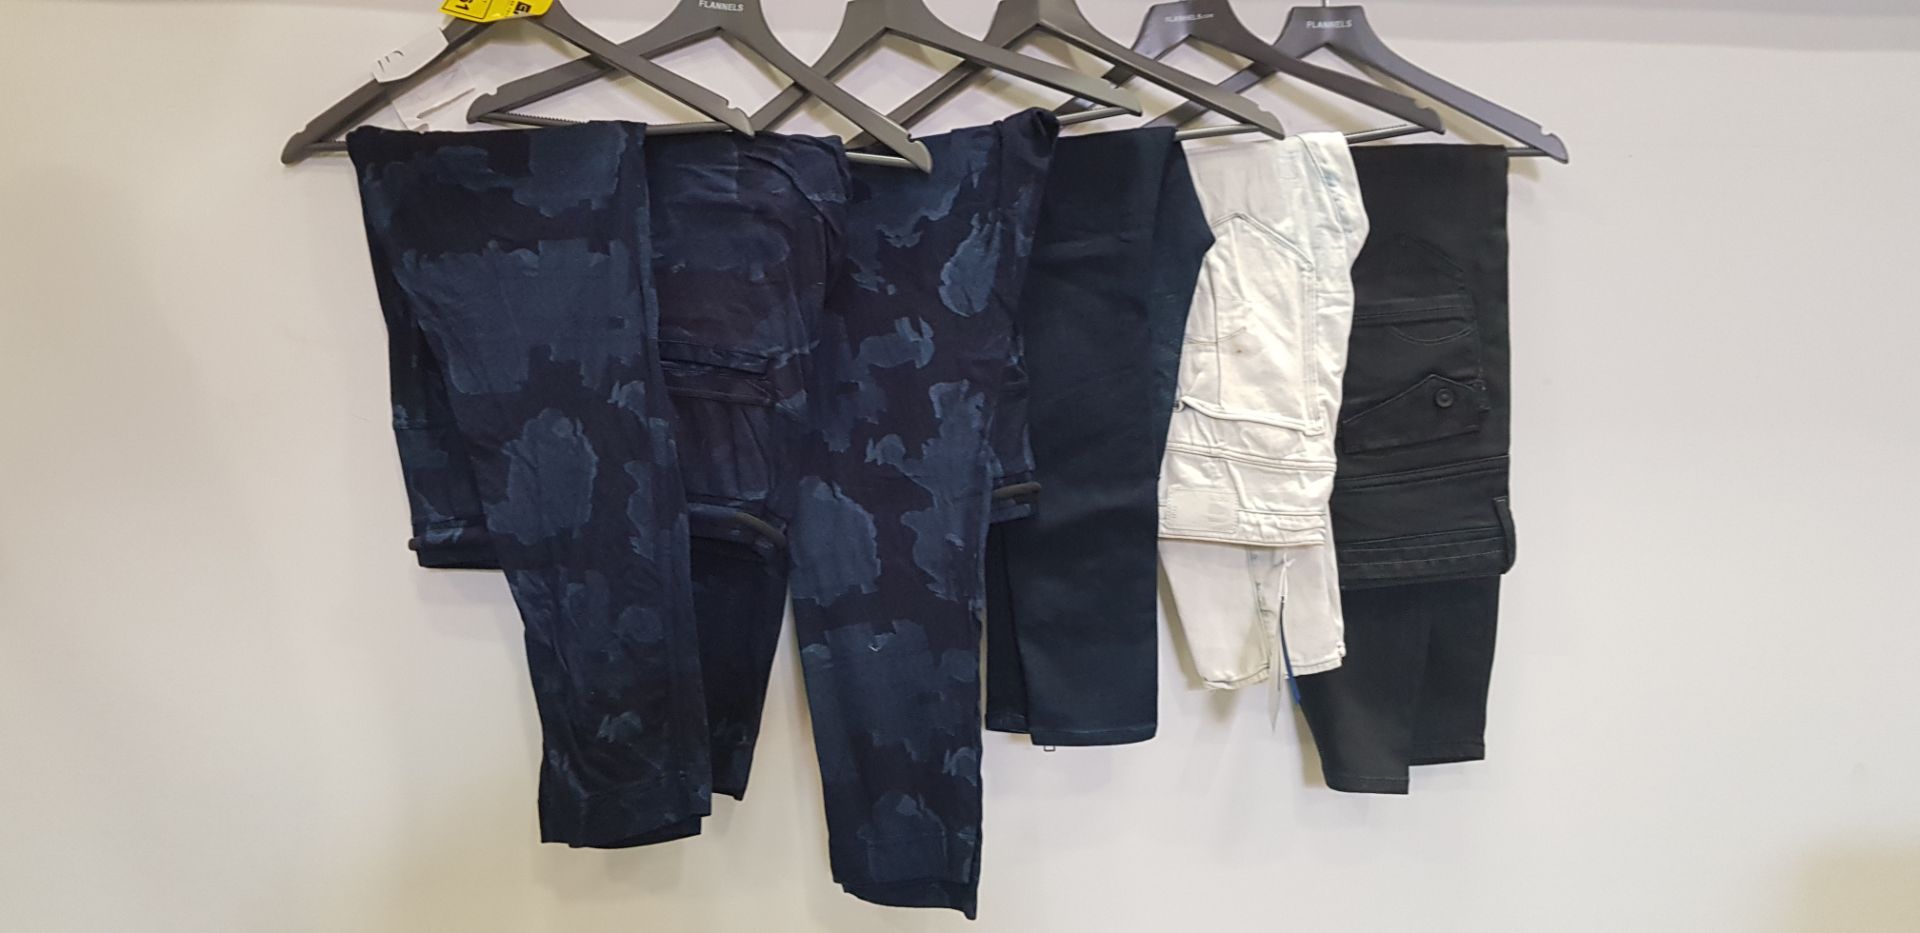 6 X BRAND NEW G-STAR RAW JEANS / JOGGERS (3 OF EACH) IN VARIOUS COLOURS (MIXED SIZES)